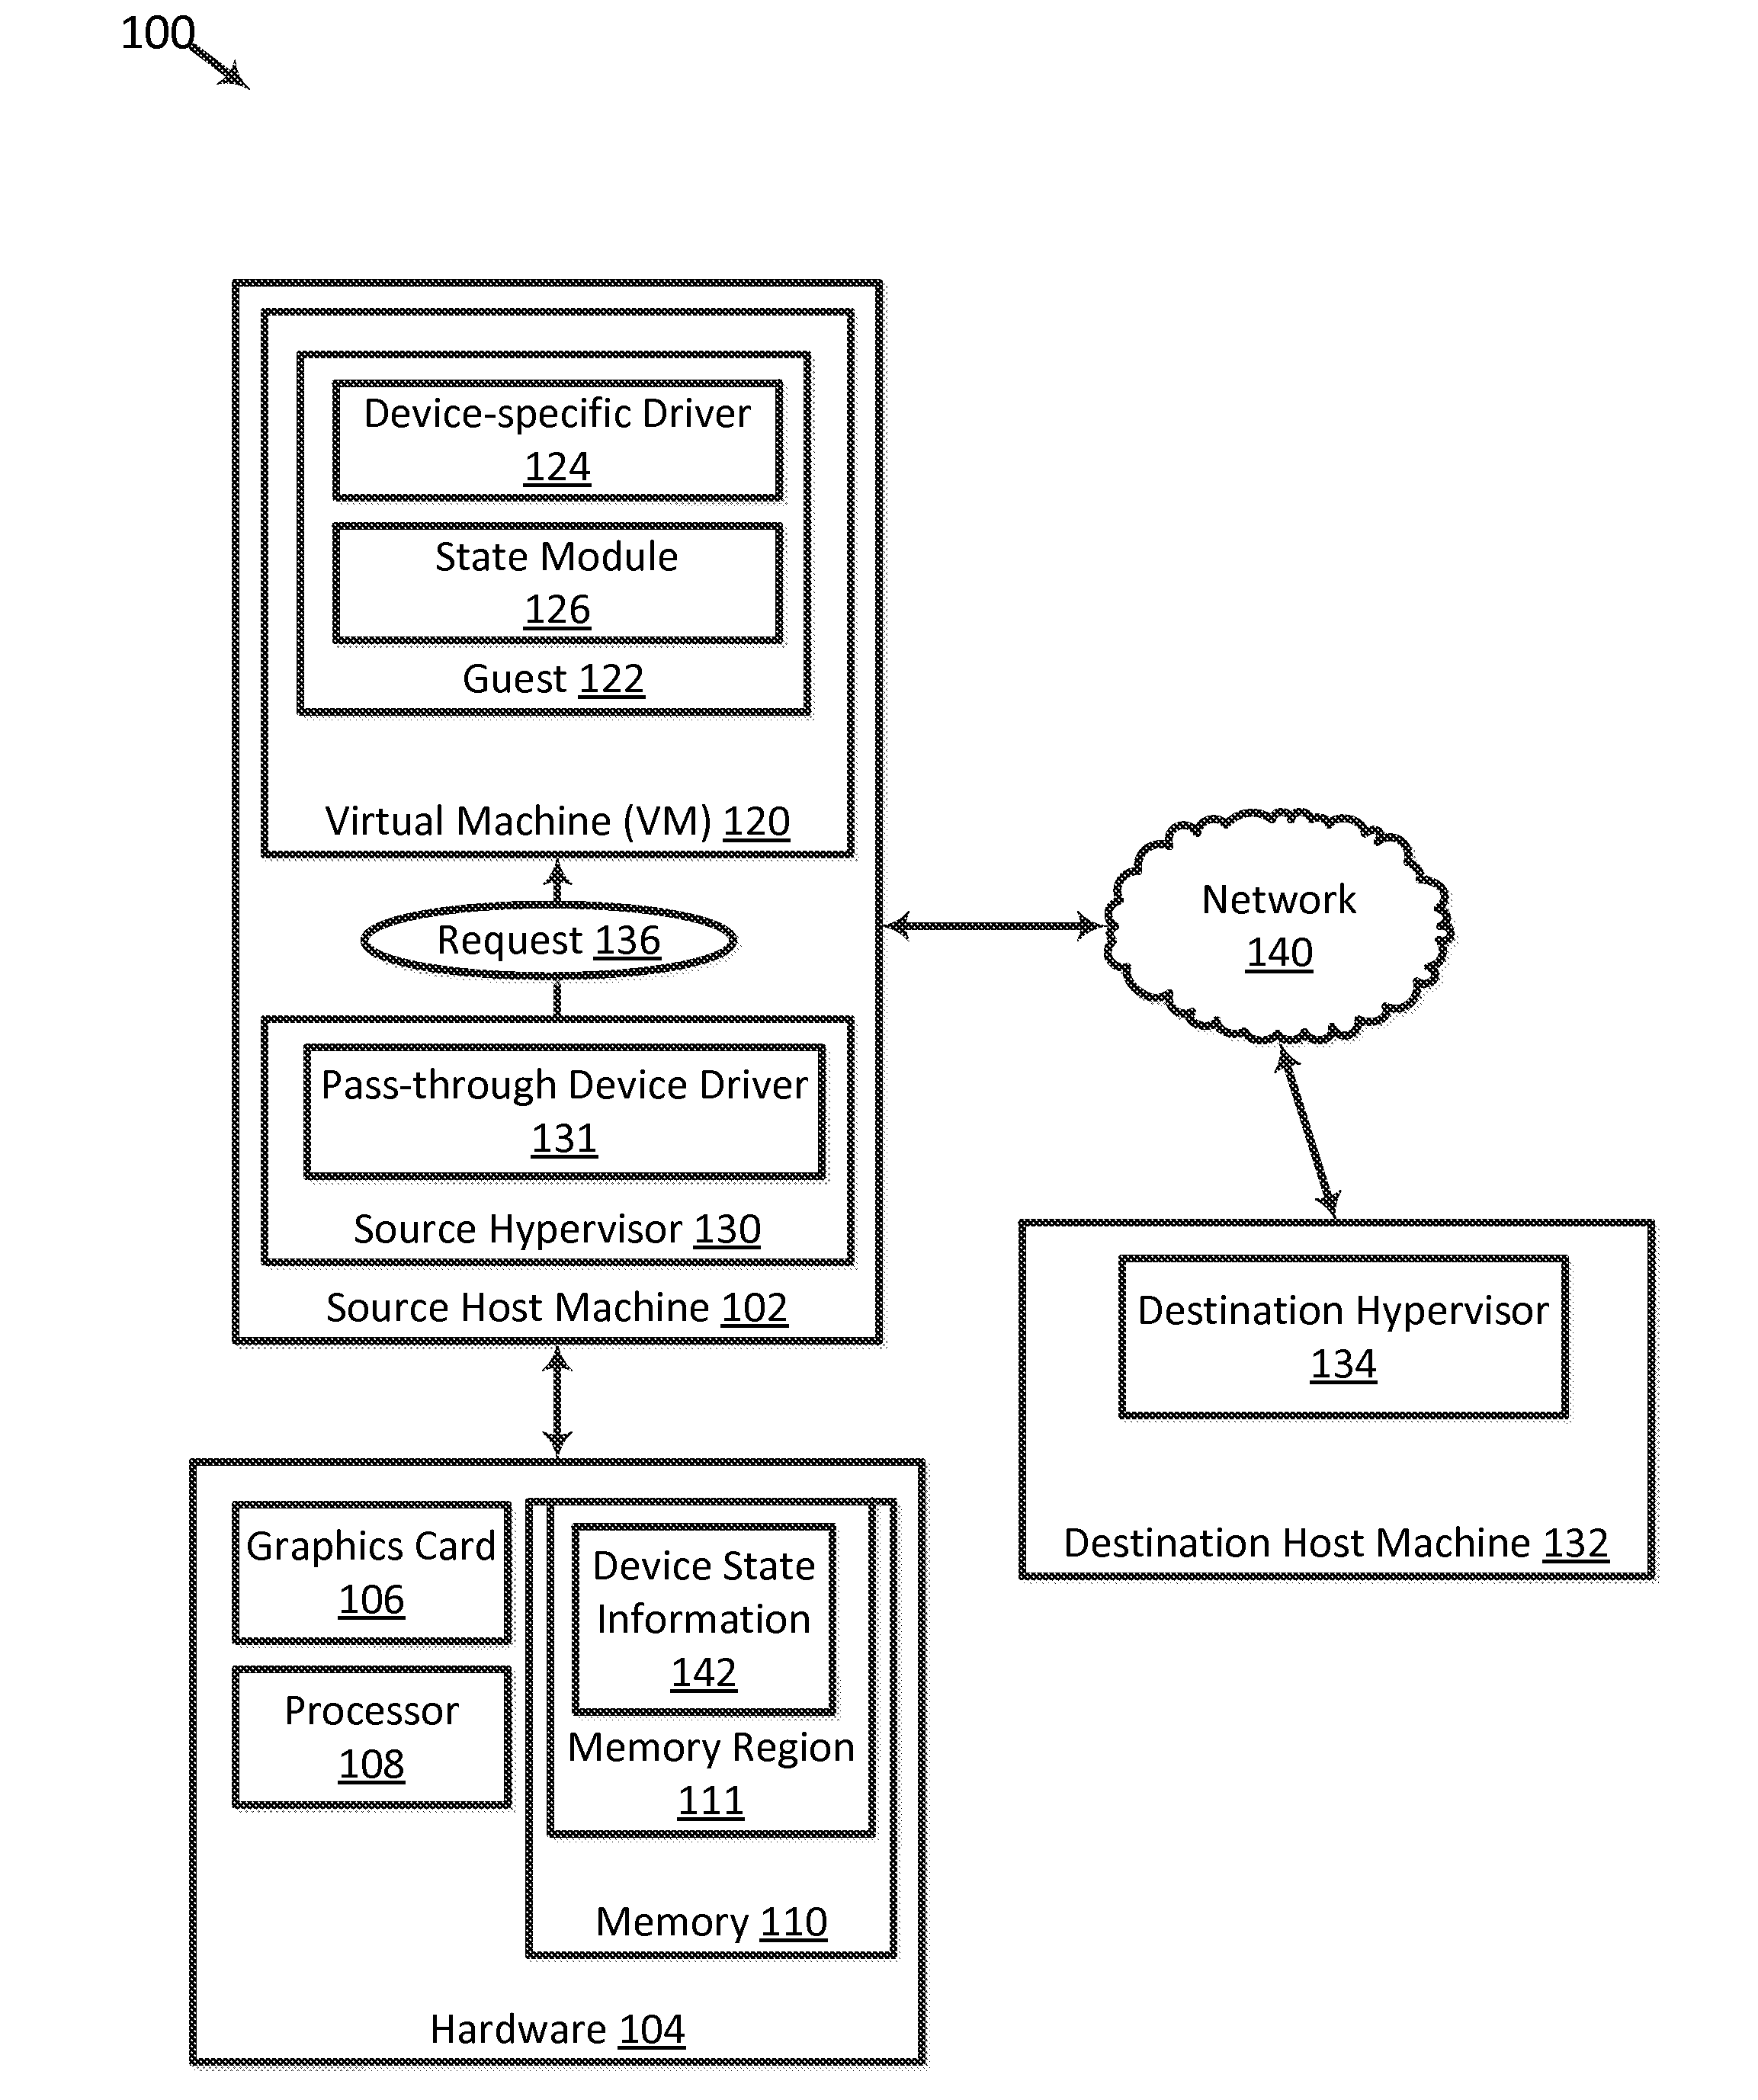 Guest Management of Devices Assigned to a Virtual Machine